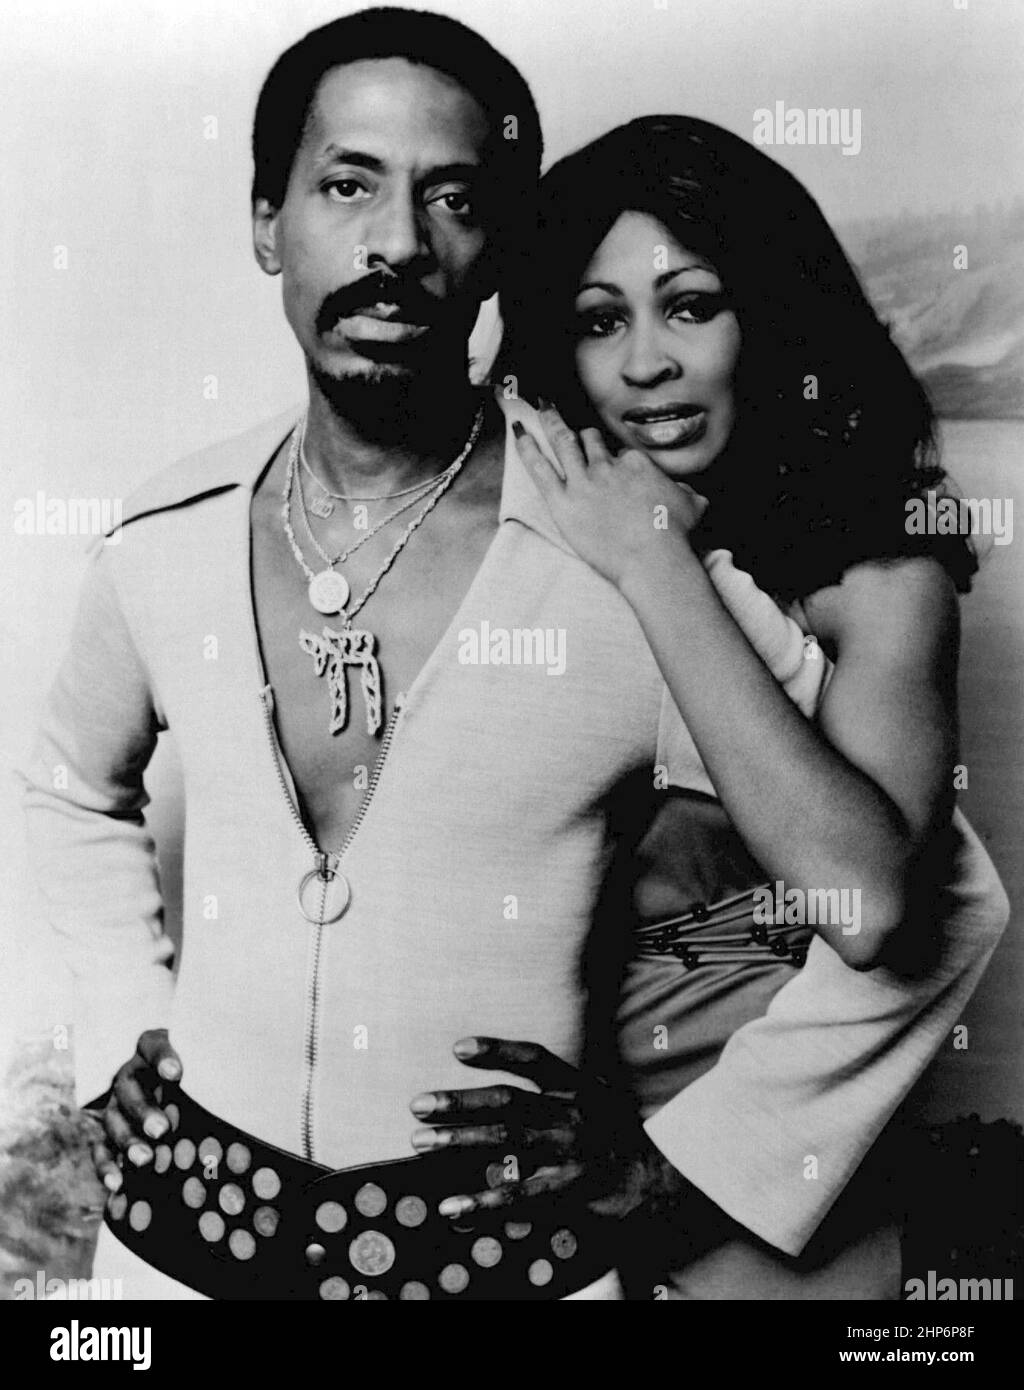 Press photo of Ike and Tina Turner taken in 1973 that was used for their appearance on The Midnight Special in February 1974. Stock Photo